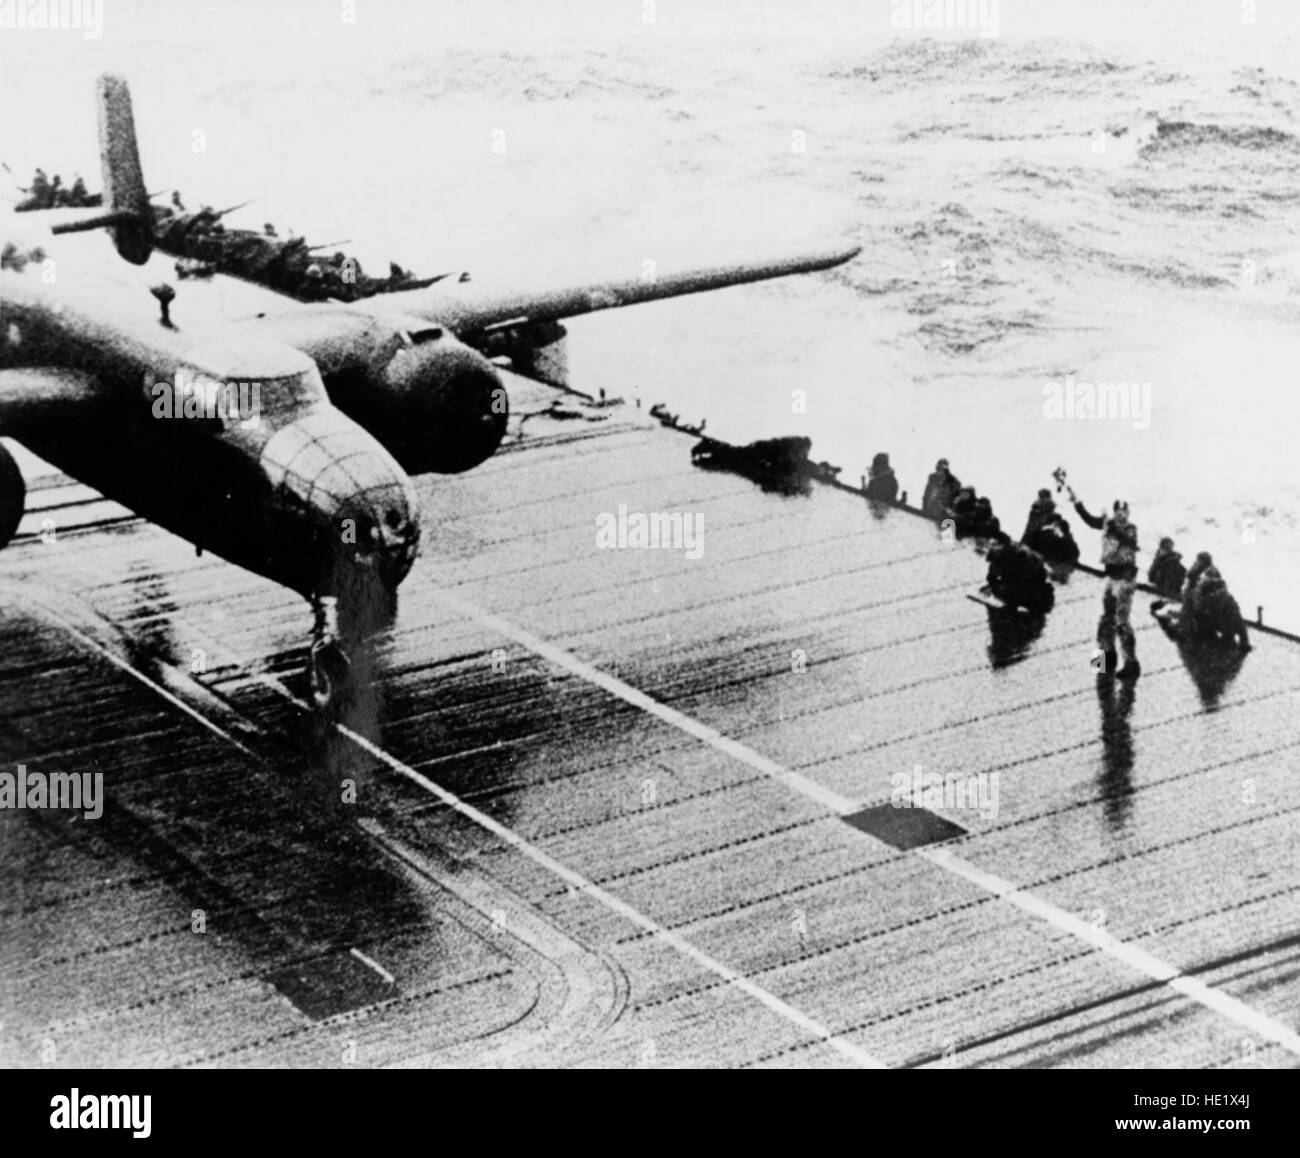 A B-25 begins its take off roll from the deck of the USS Hornet for the 'Doolittle Raid' on Tokyo, Saturday, April 18, 1942. The bombing attack by the United States of America on the Japanese capital Tokyo and other places on the island of Honshu during World War II, was the first air raid to strike the Japanese Home Islands. Sixteen B-25B Mitchell medium bombers were launched without fighter escort from the U.S. Navy aircraft carrier USS Hornet deep in the Western Pacific Ocean, each with a crew of five men. The plan called for them to bomb military targets in Japan, and to continue westward  Stock Photo